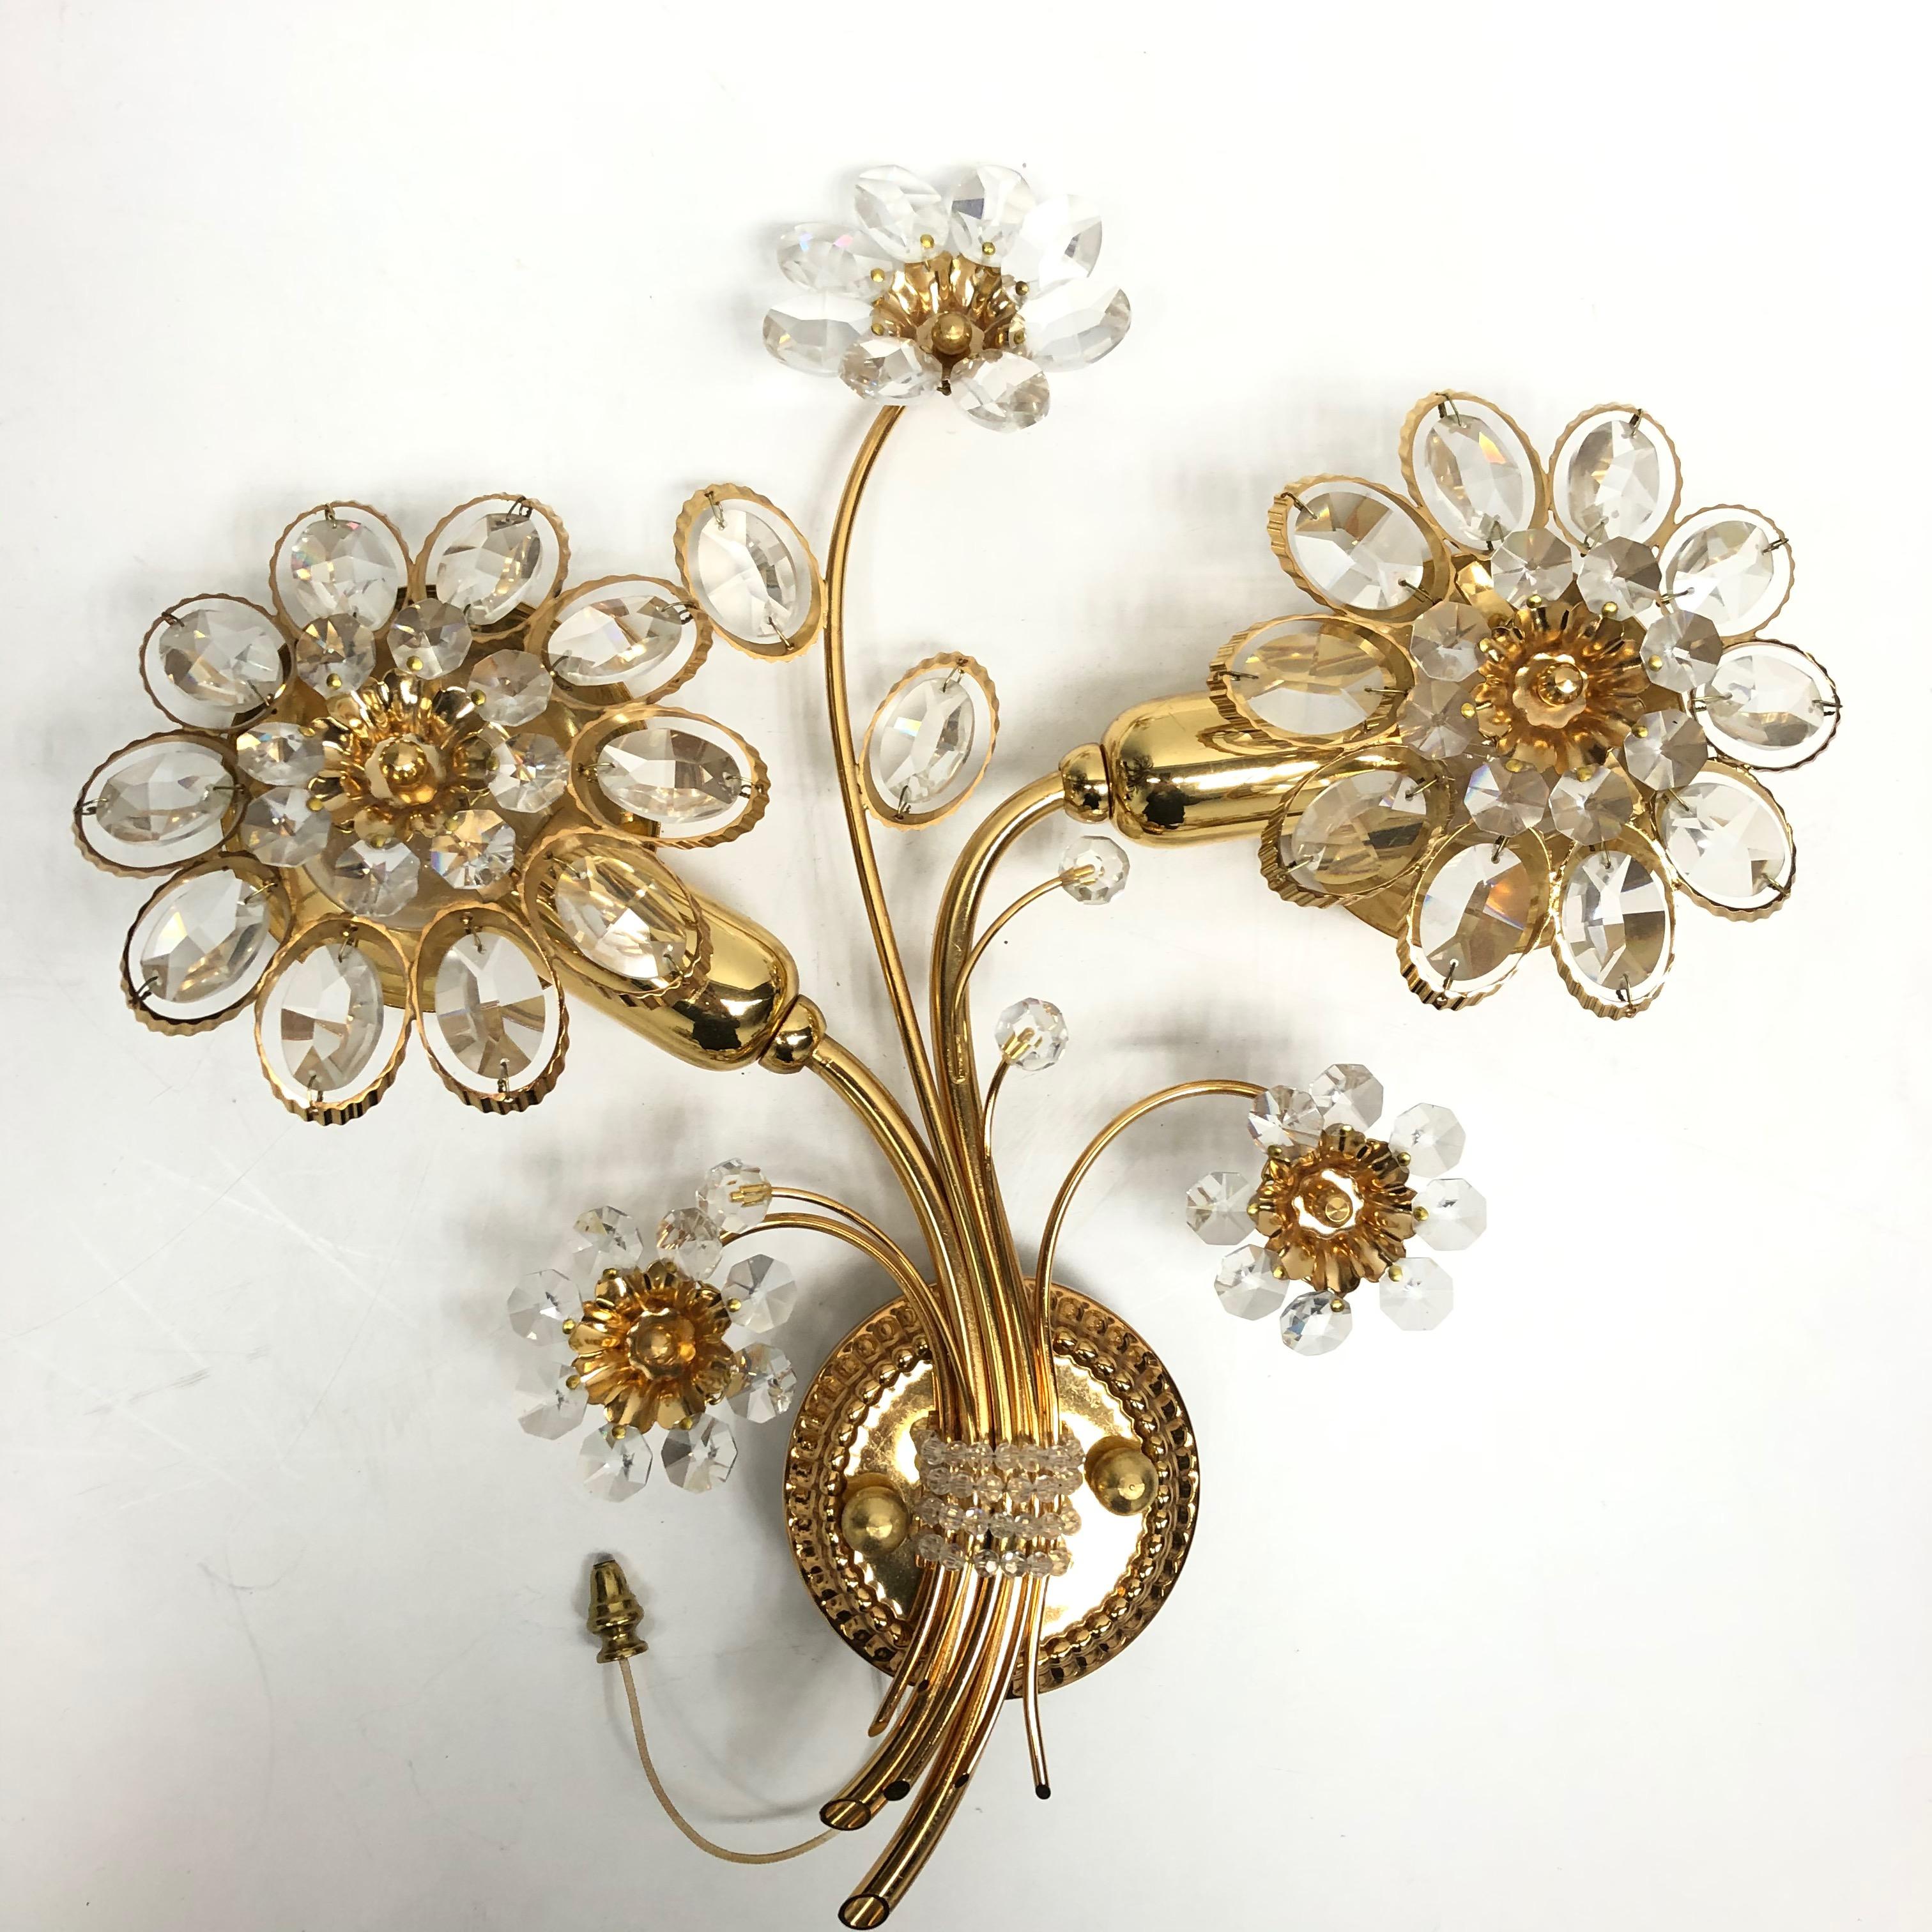 A single vintage gold-plated sconce with faceted crystal flowers made by the German company Palwa. The fixture has two European style E14 sockets. It requires European E14 candelabra bulbs, up to 40 Watts each.